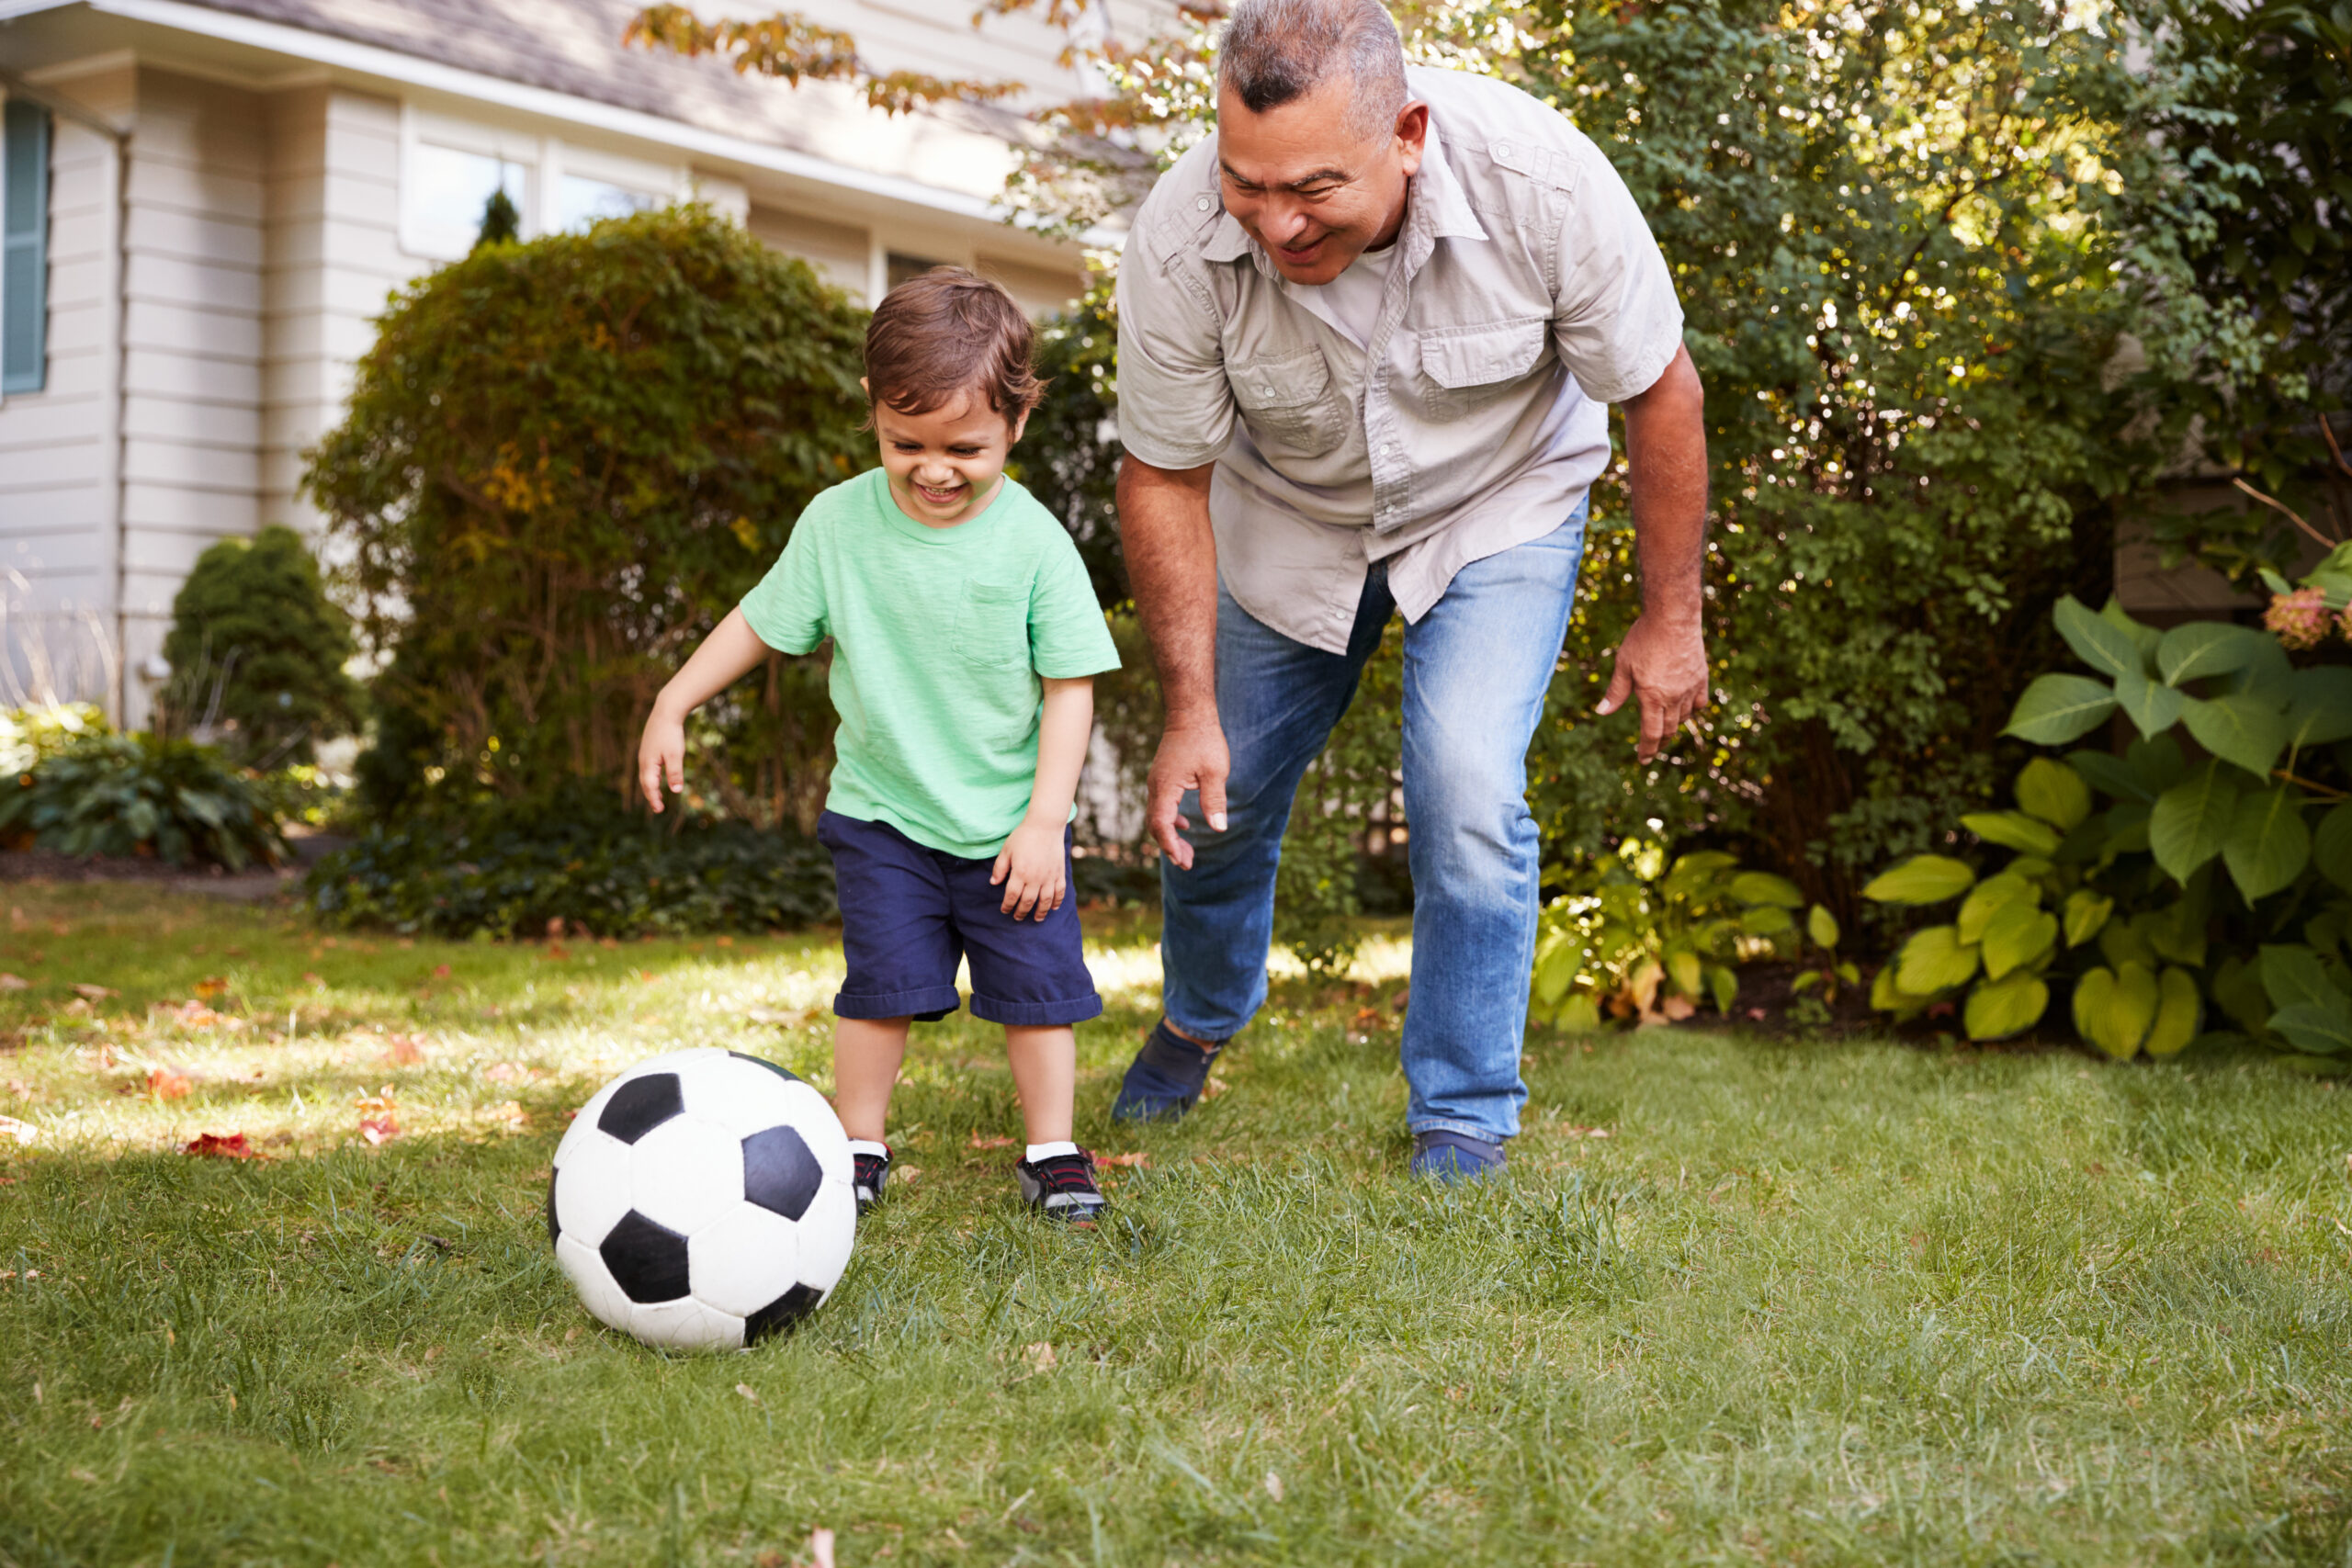 Father and son playing soccer outdoors